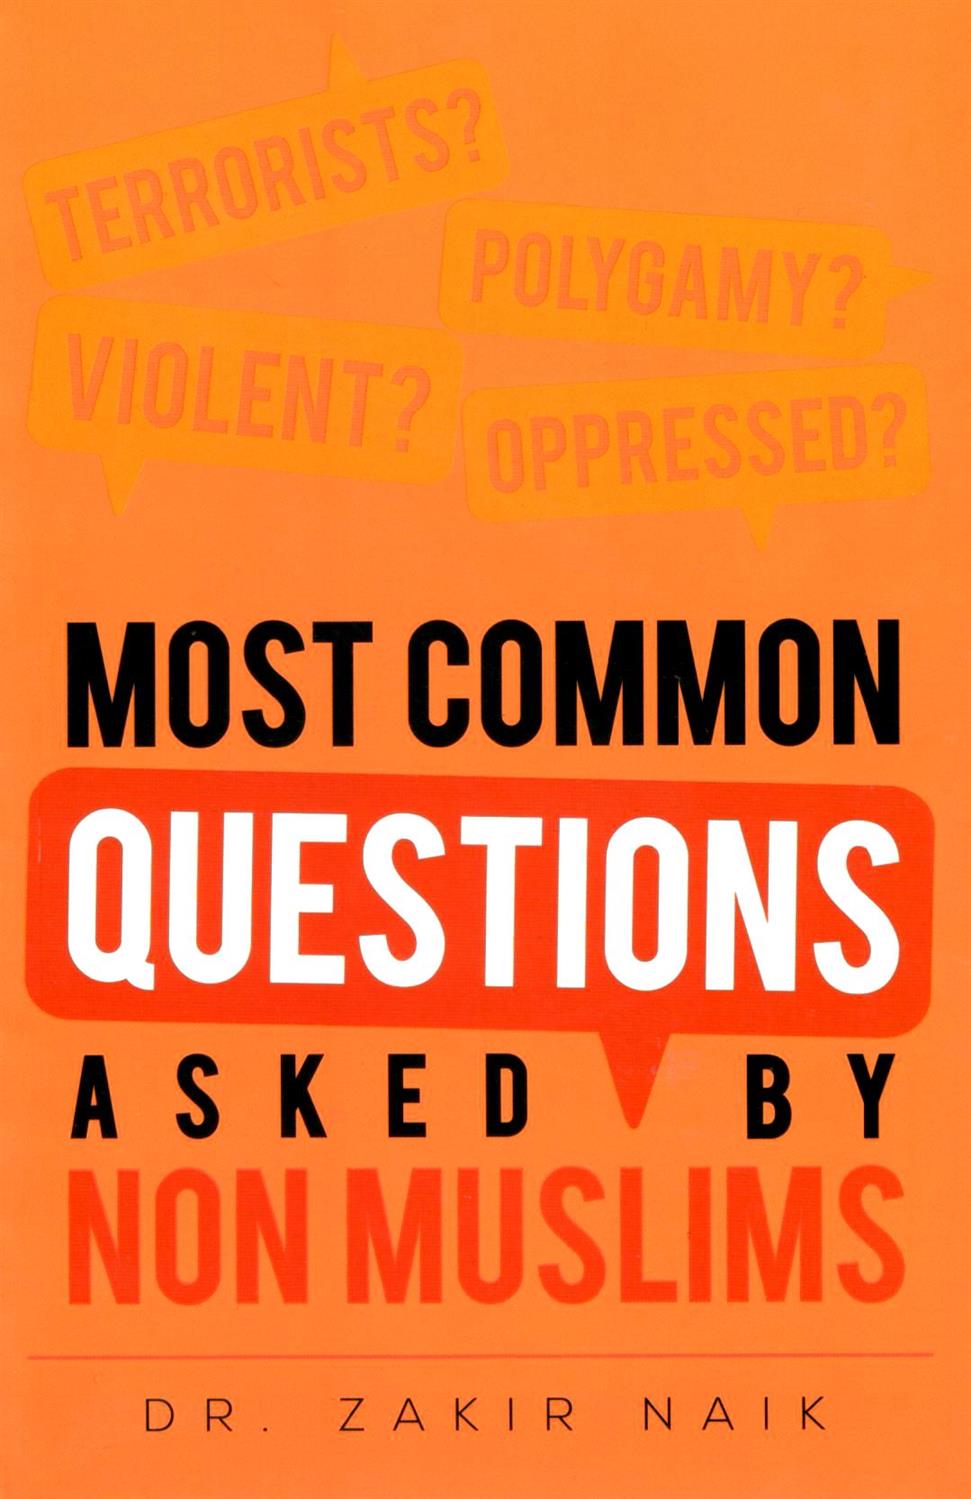 Most Common Questions Asked by Non Muslims Book by Zakir Naik